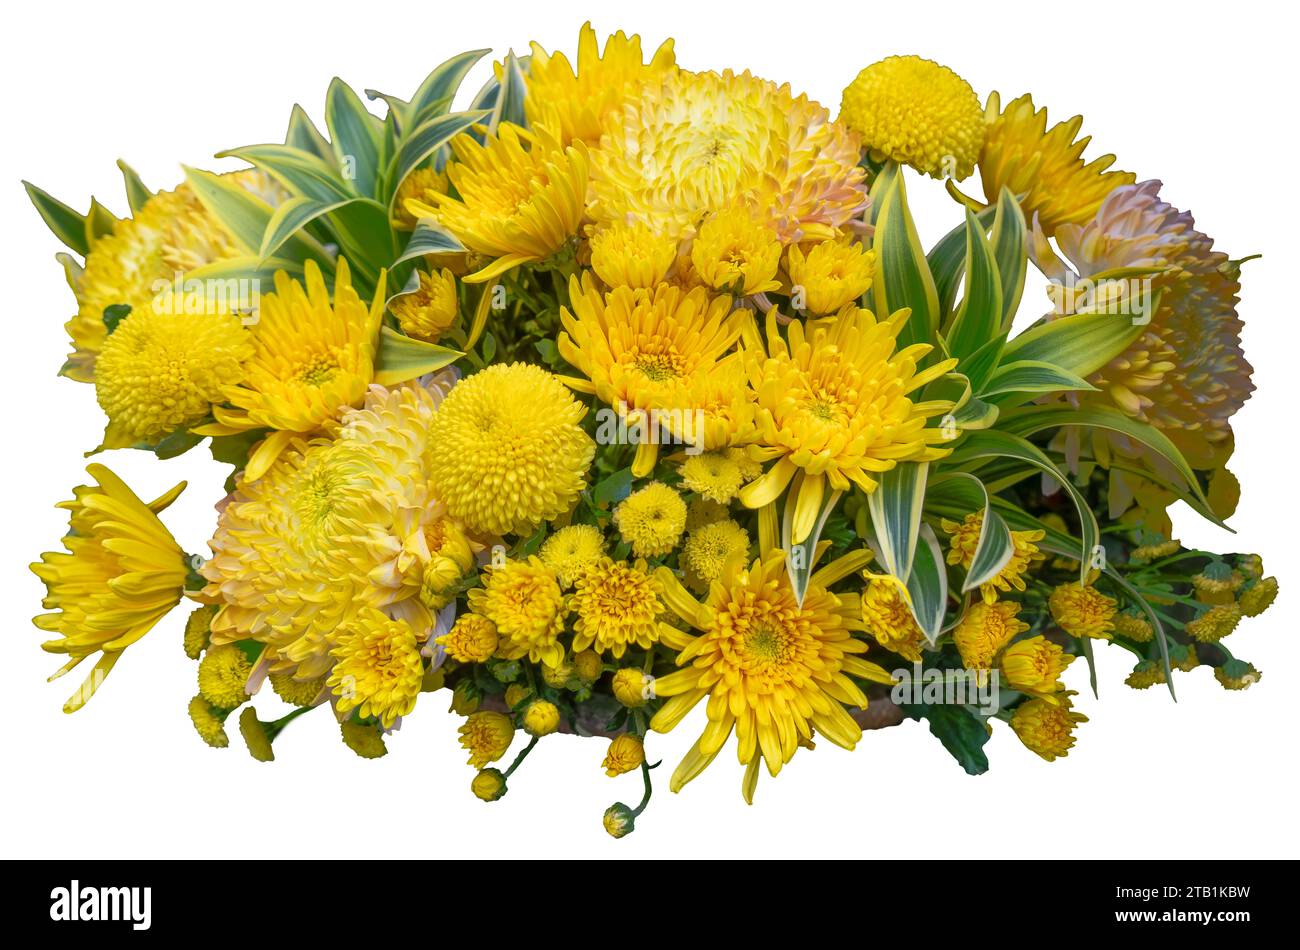 Yellow chrysanthemums with flowers of various sizes. Isolate a large flower with clipping path. Taipei Chrysanthemum Exhibition. Stock Photo